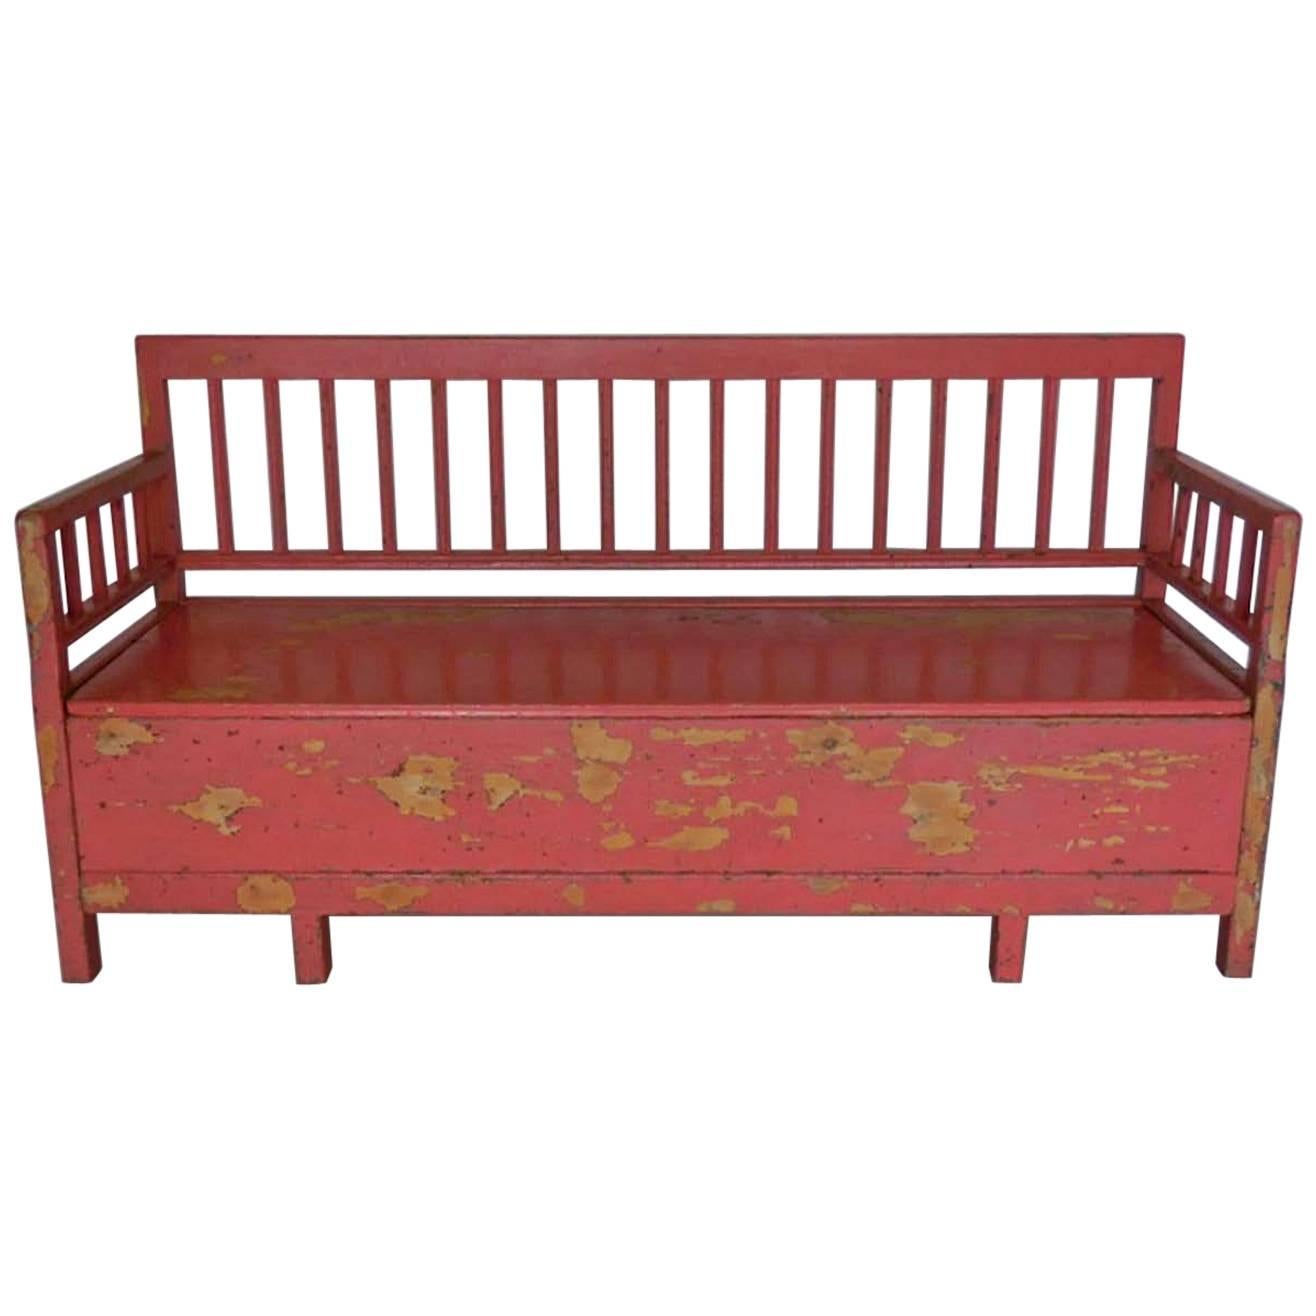 19th Century Painted Swedish Bench/Daybed